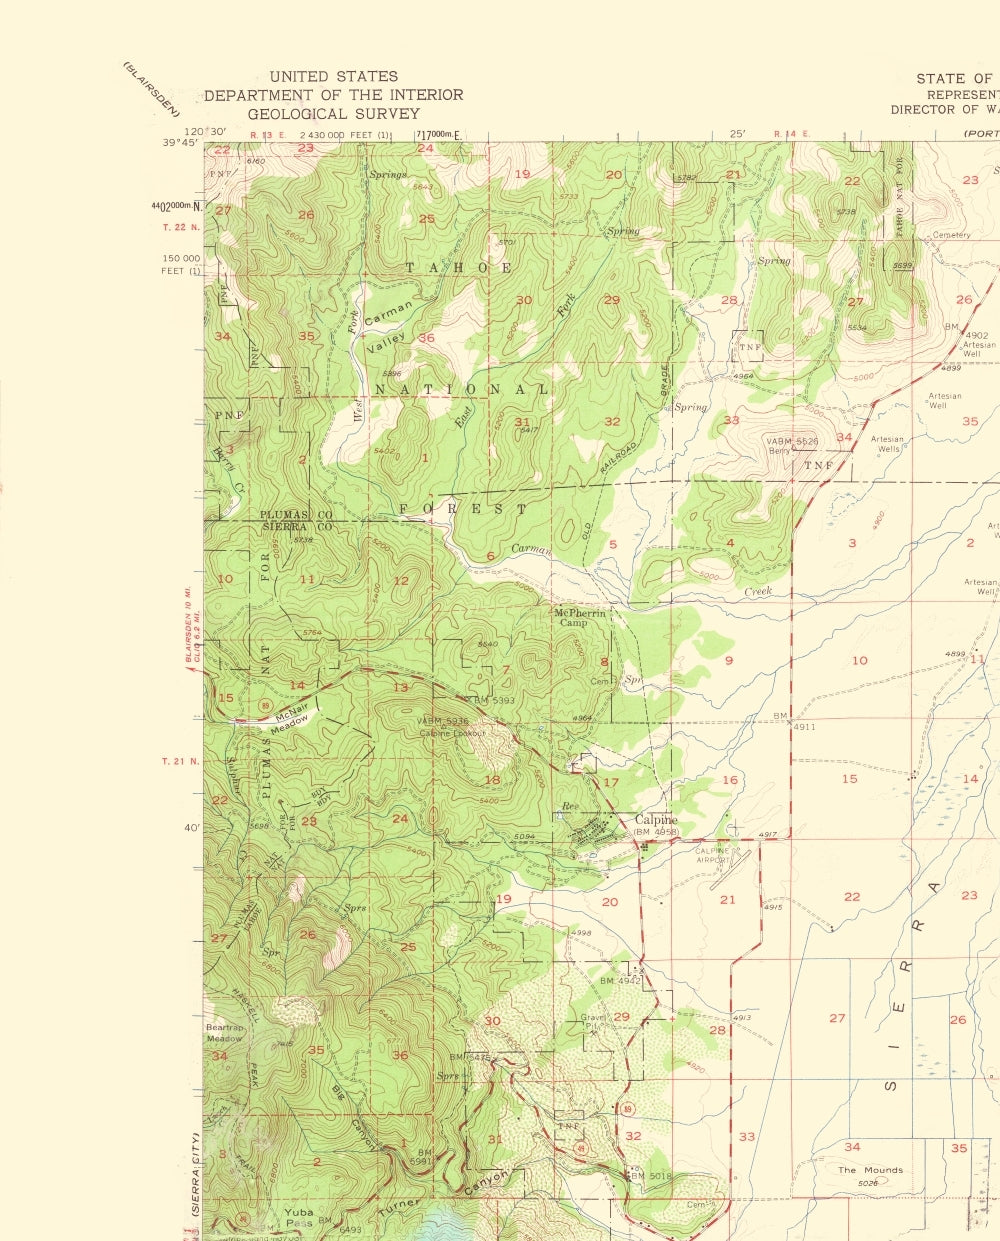 Topographical Map - Sierraville California Quad - USGS 1960 - 23 x 28.56 - Vintage Wall Art